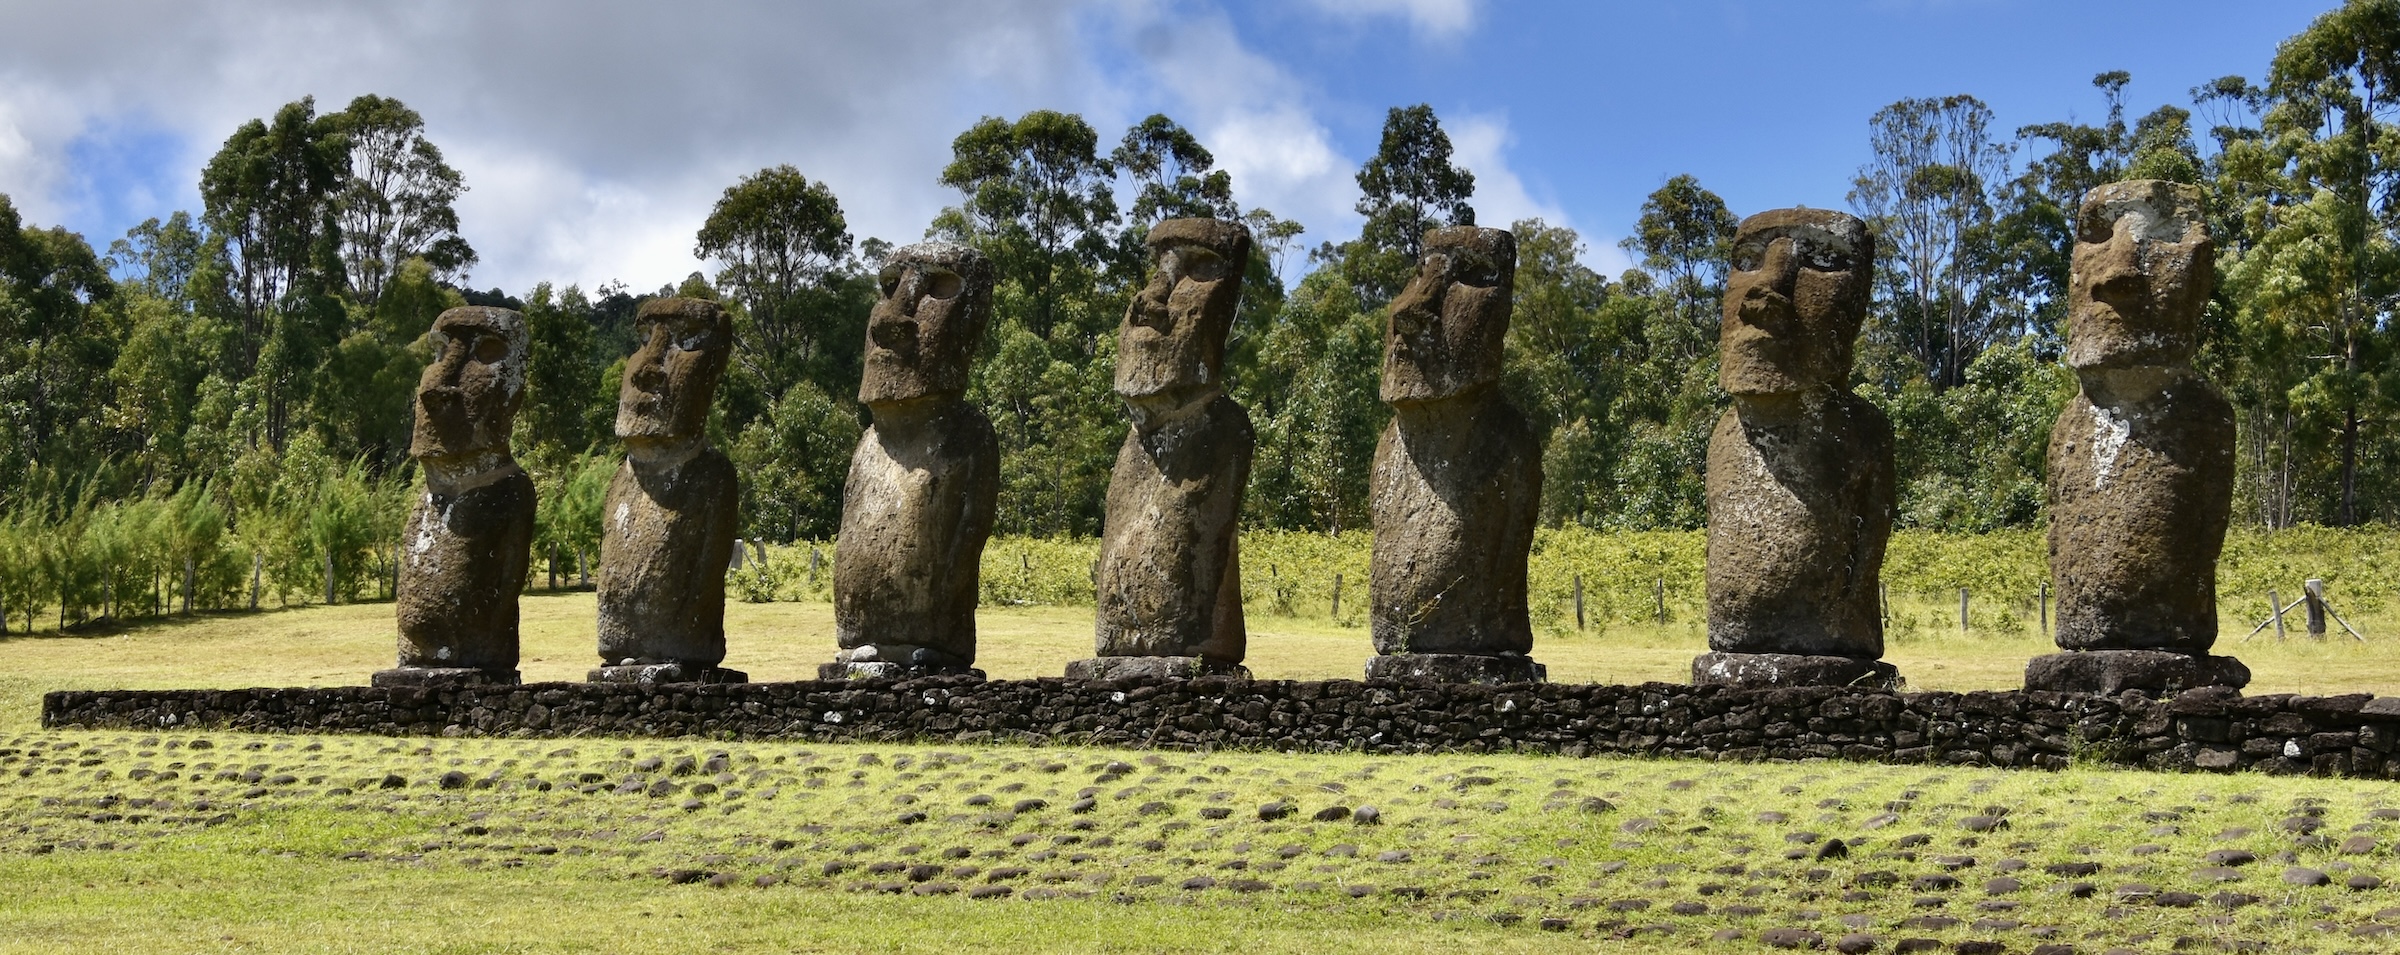 The Seven Brothers, Easter Island, Chile